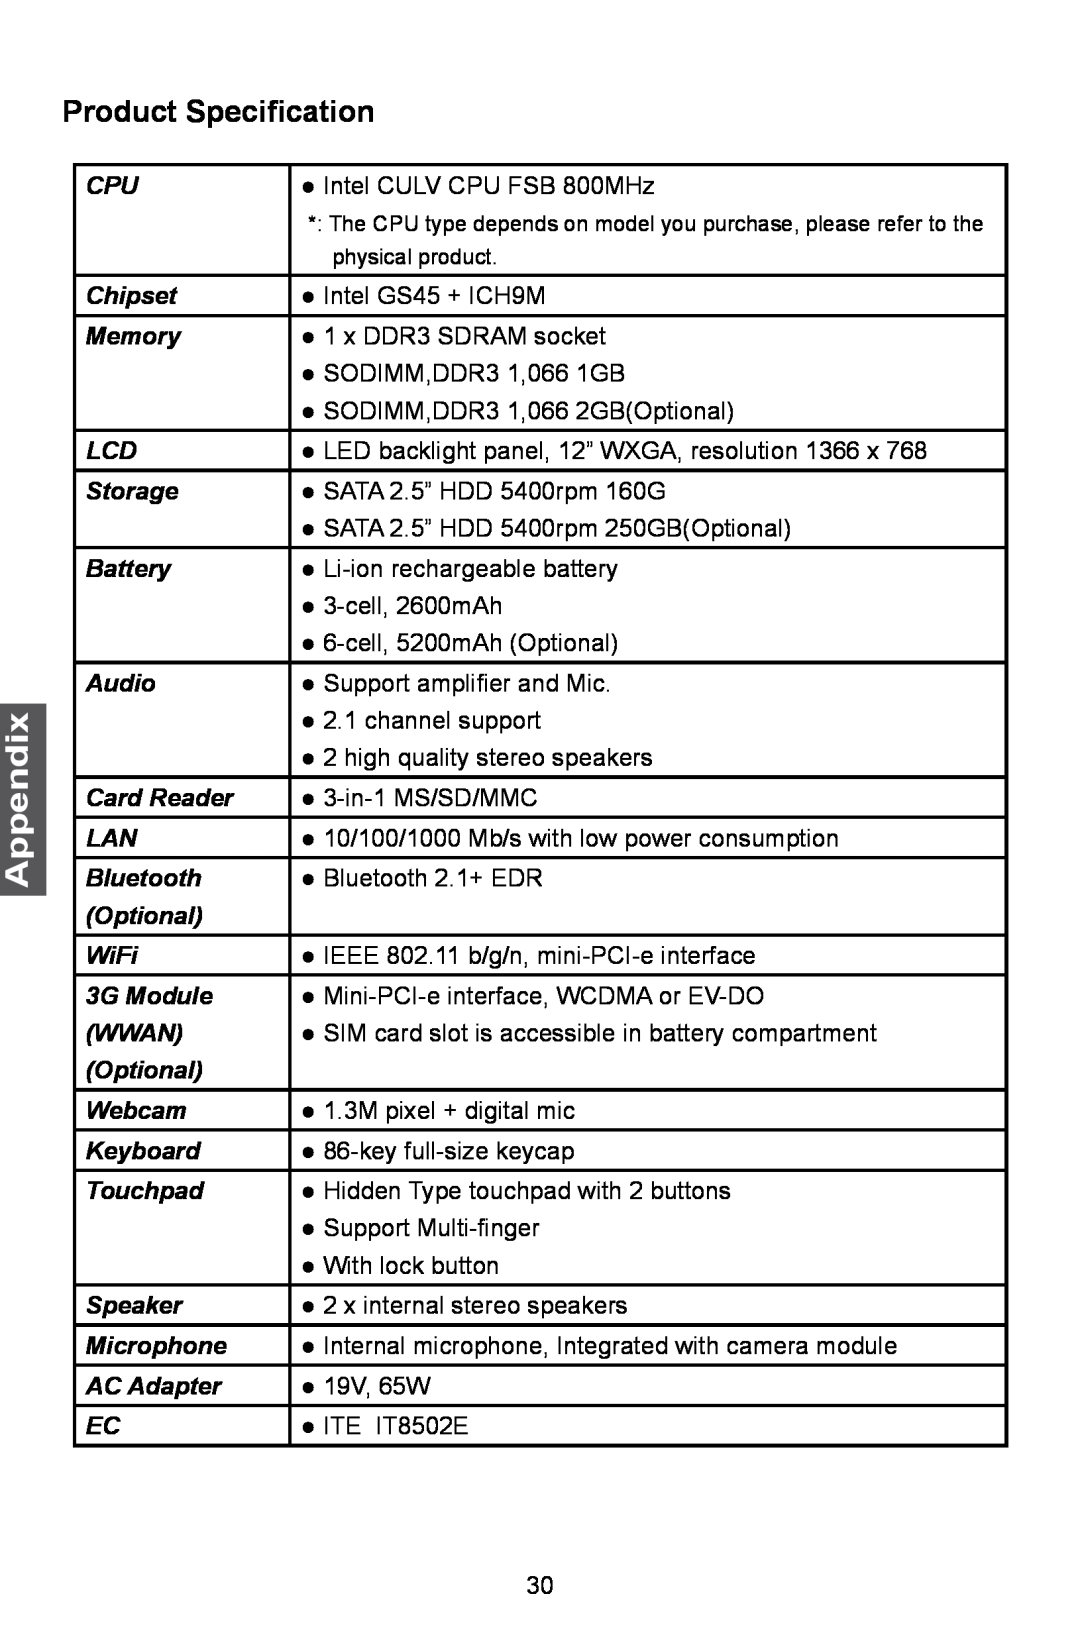 HANNspree SN12E2 manual Product Specification, Appendix 